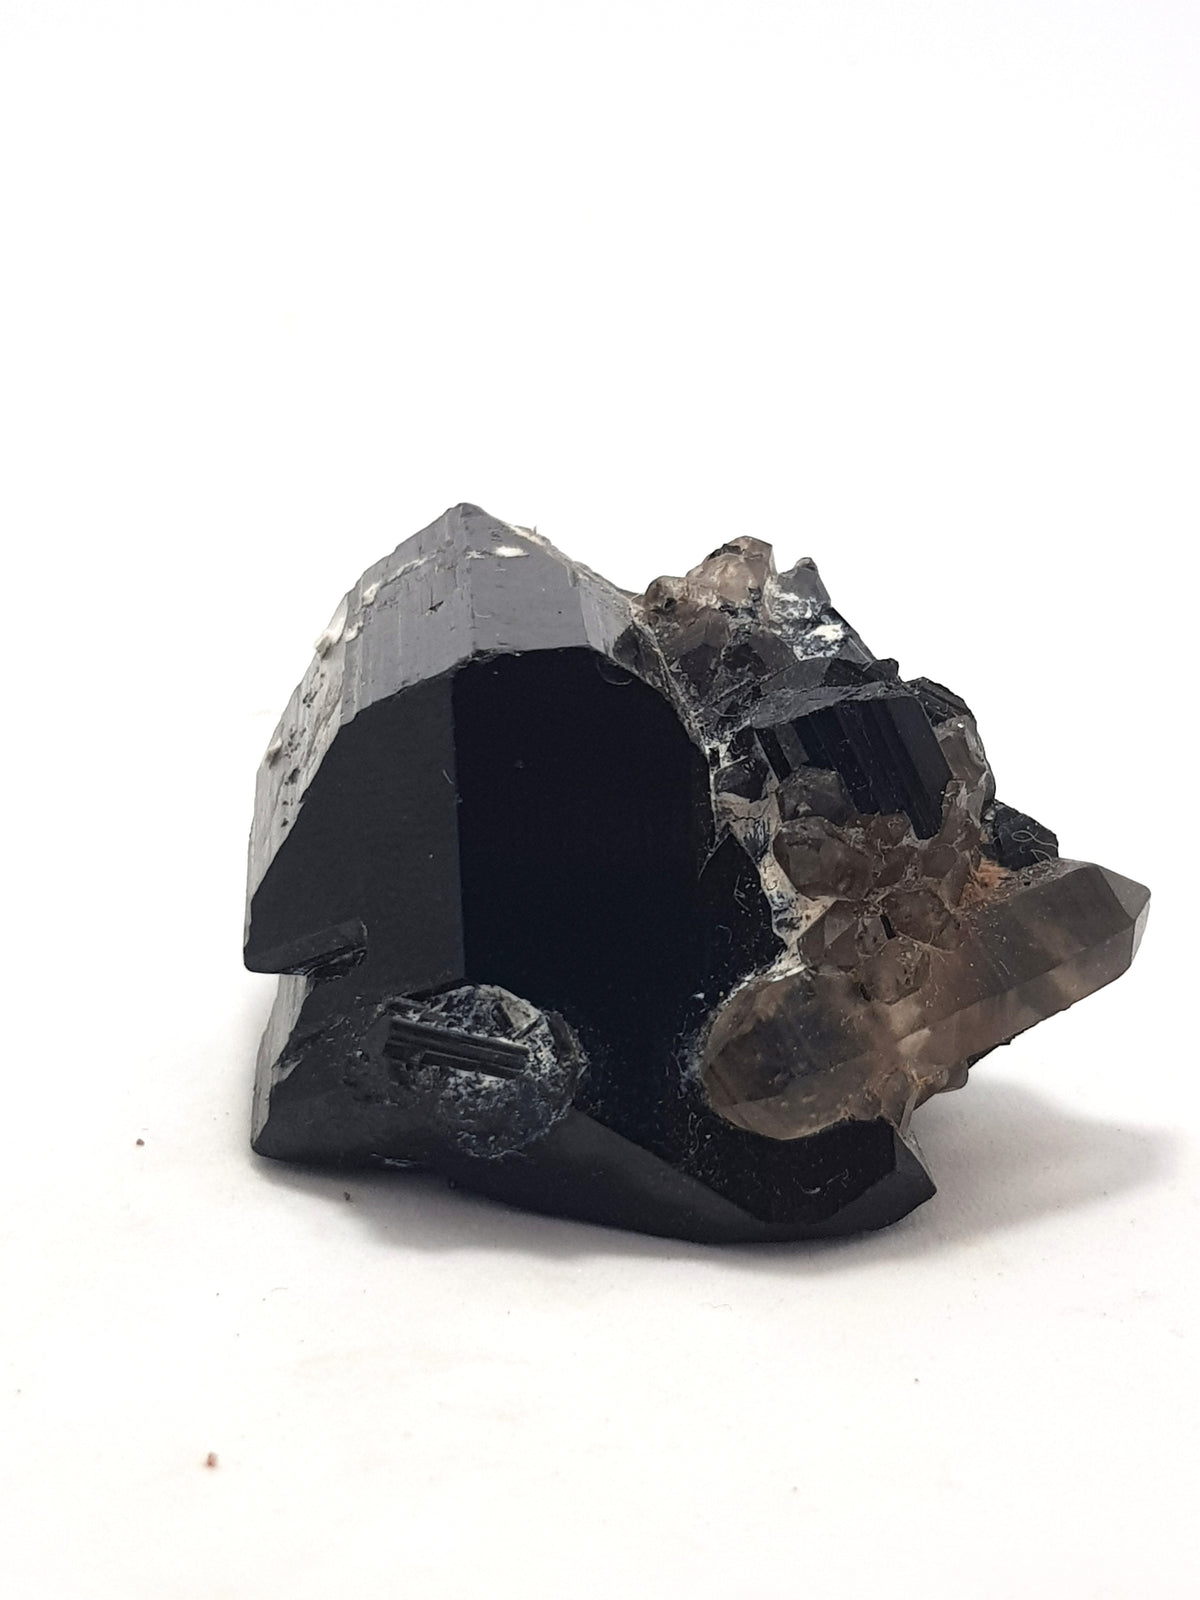 This image if of a trigonal prismatic black tourmaline crystal. It has been taken so that the termination is visible. There is a double terminated smoky quartz crystal growing in association. it is on the bottom right hand side.